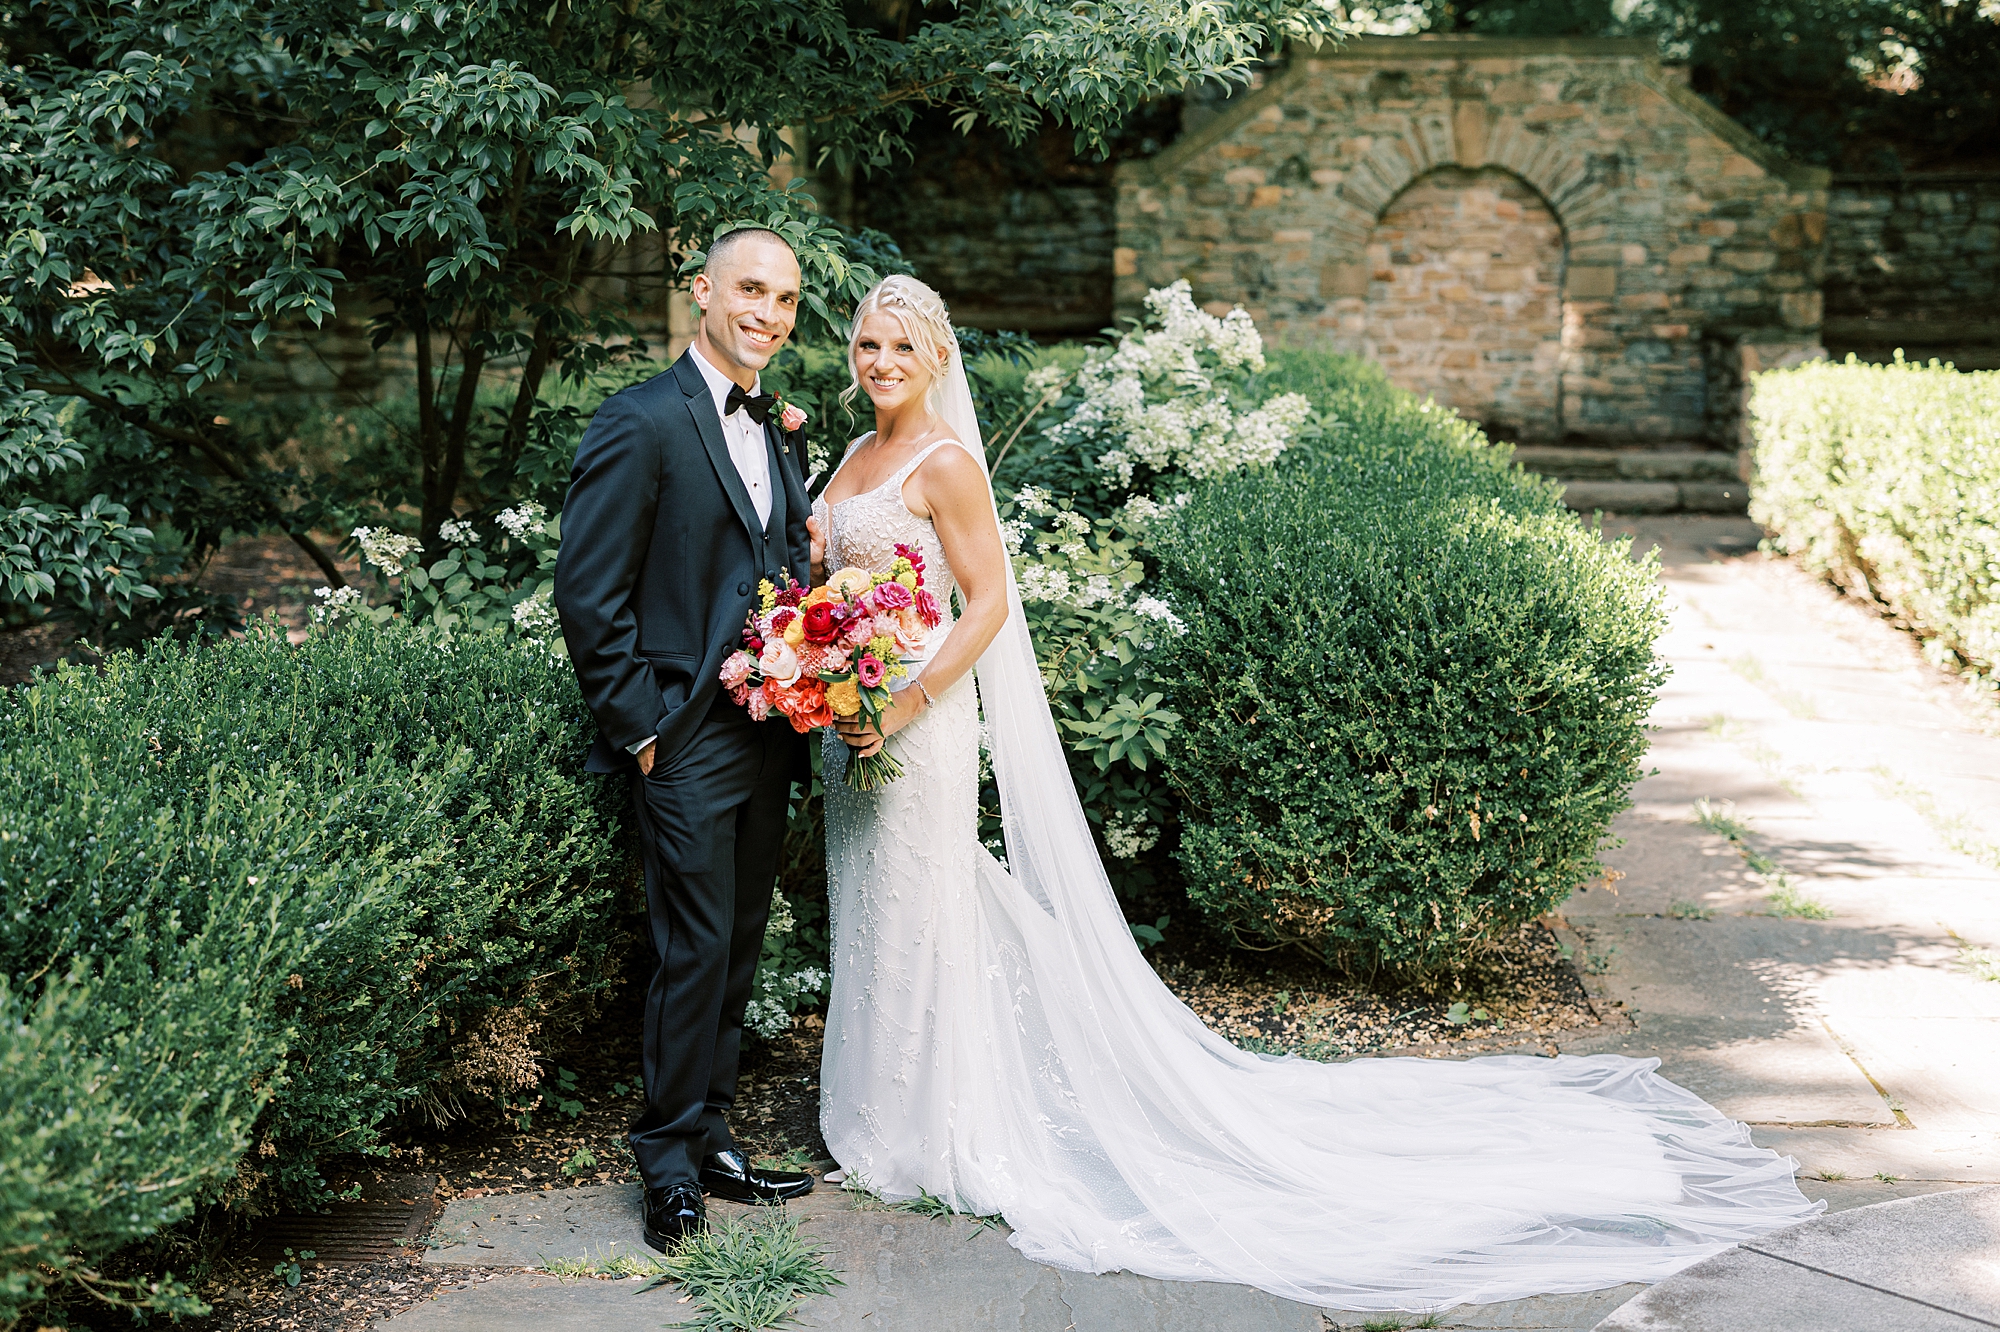 newlyweds pose by gardens at Parque Ridley Creek